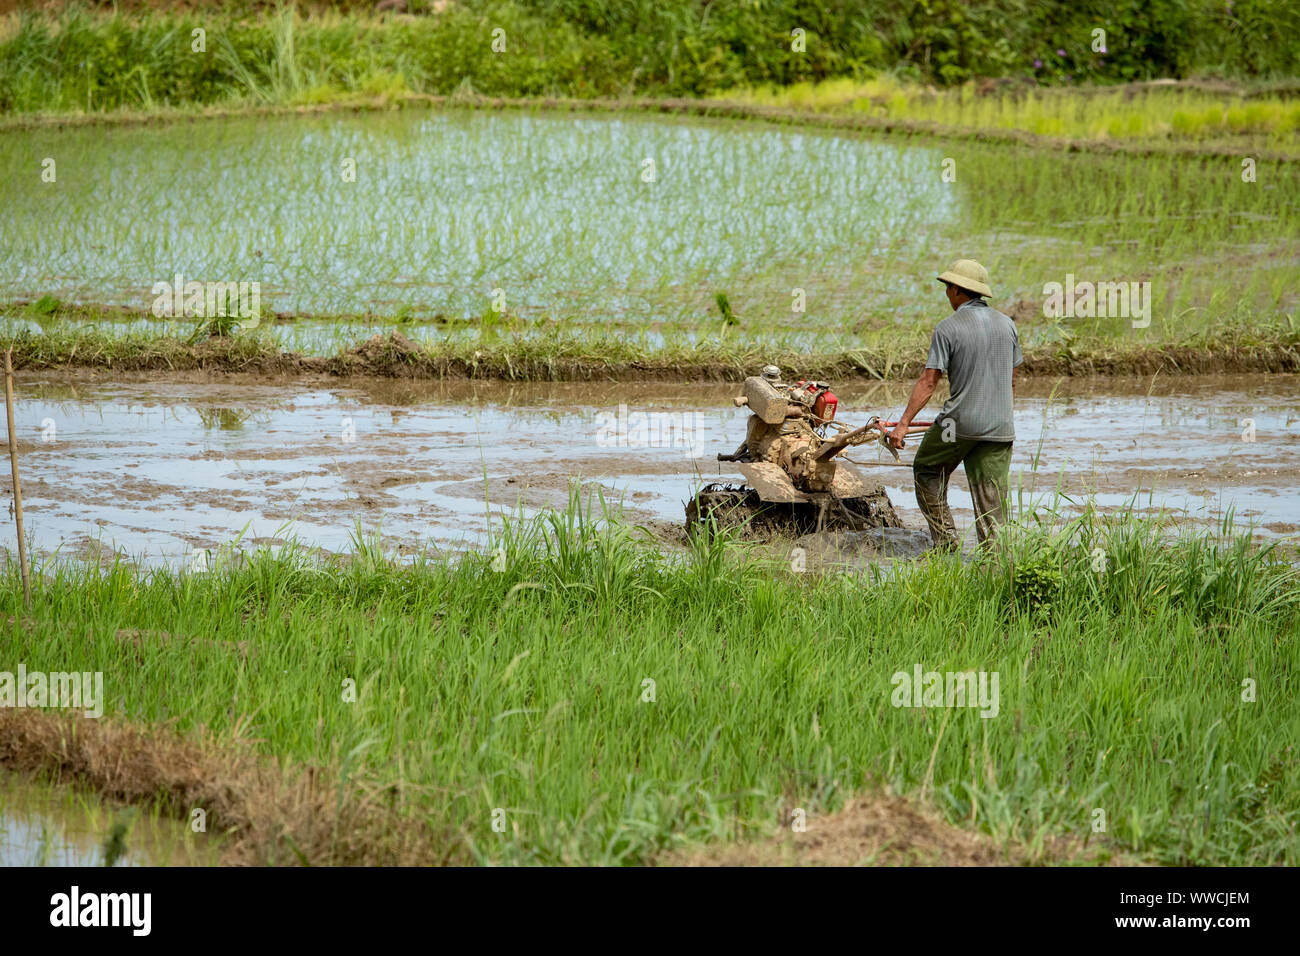 Preparing the paddy field for planting with hand operated plough Stock Photo